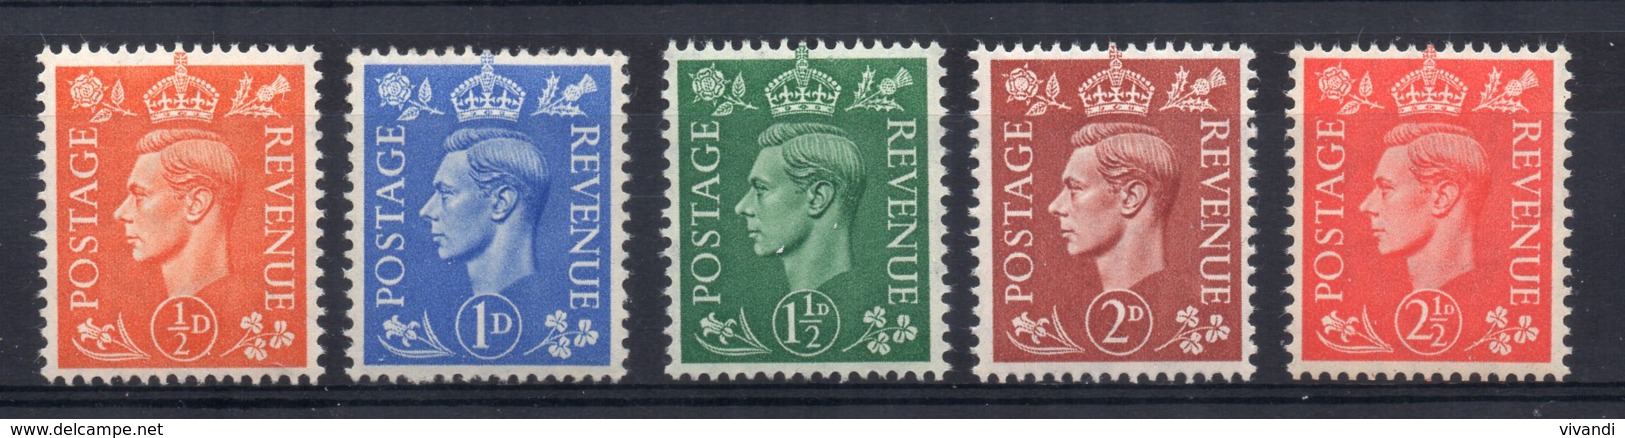 Great Britain - 1951 - Definitives (Issued 03/05/51) - MNH - Nuovi